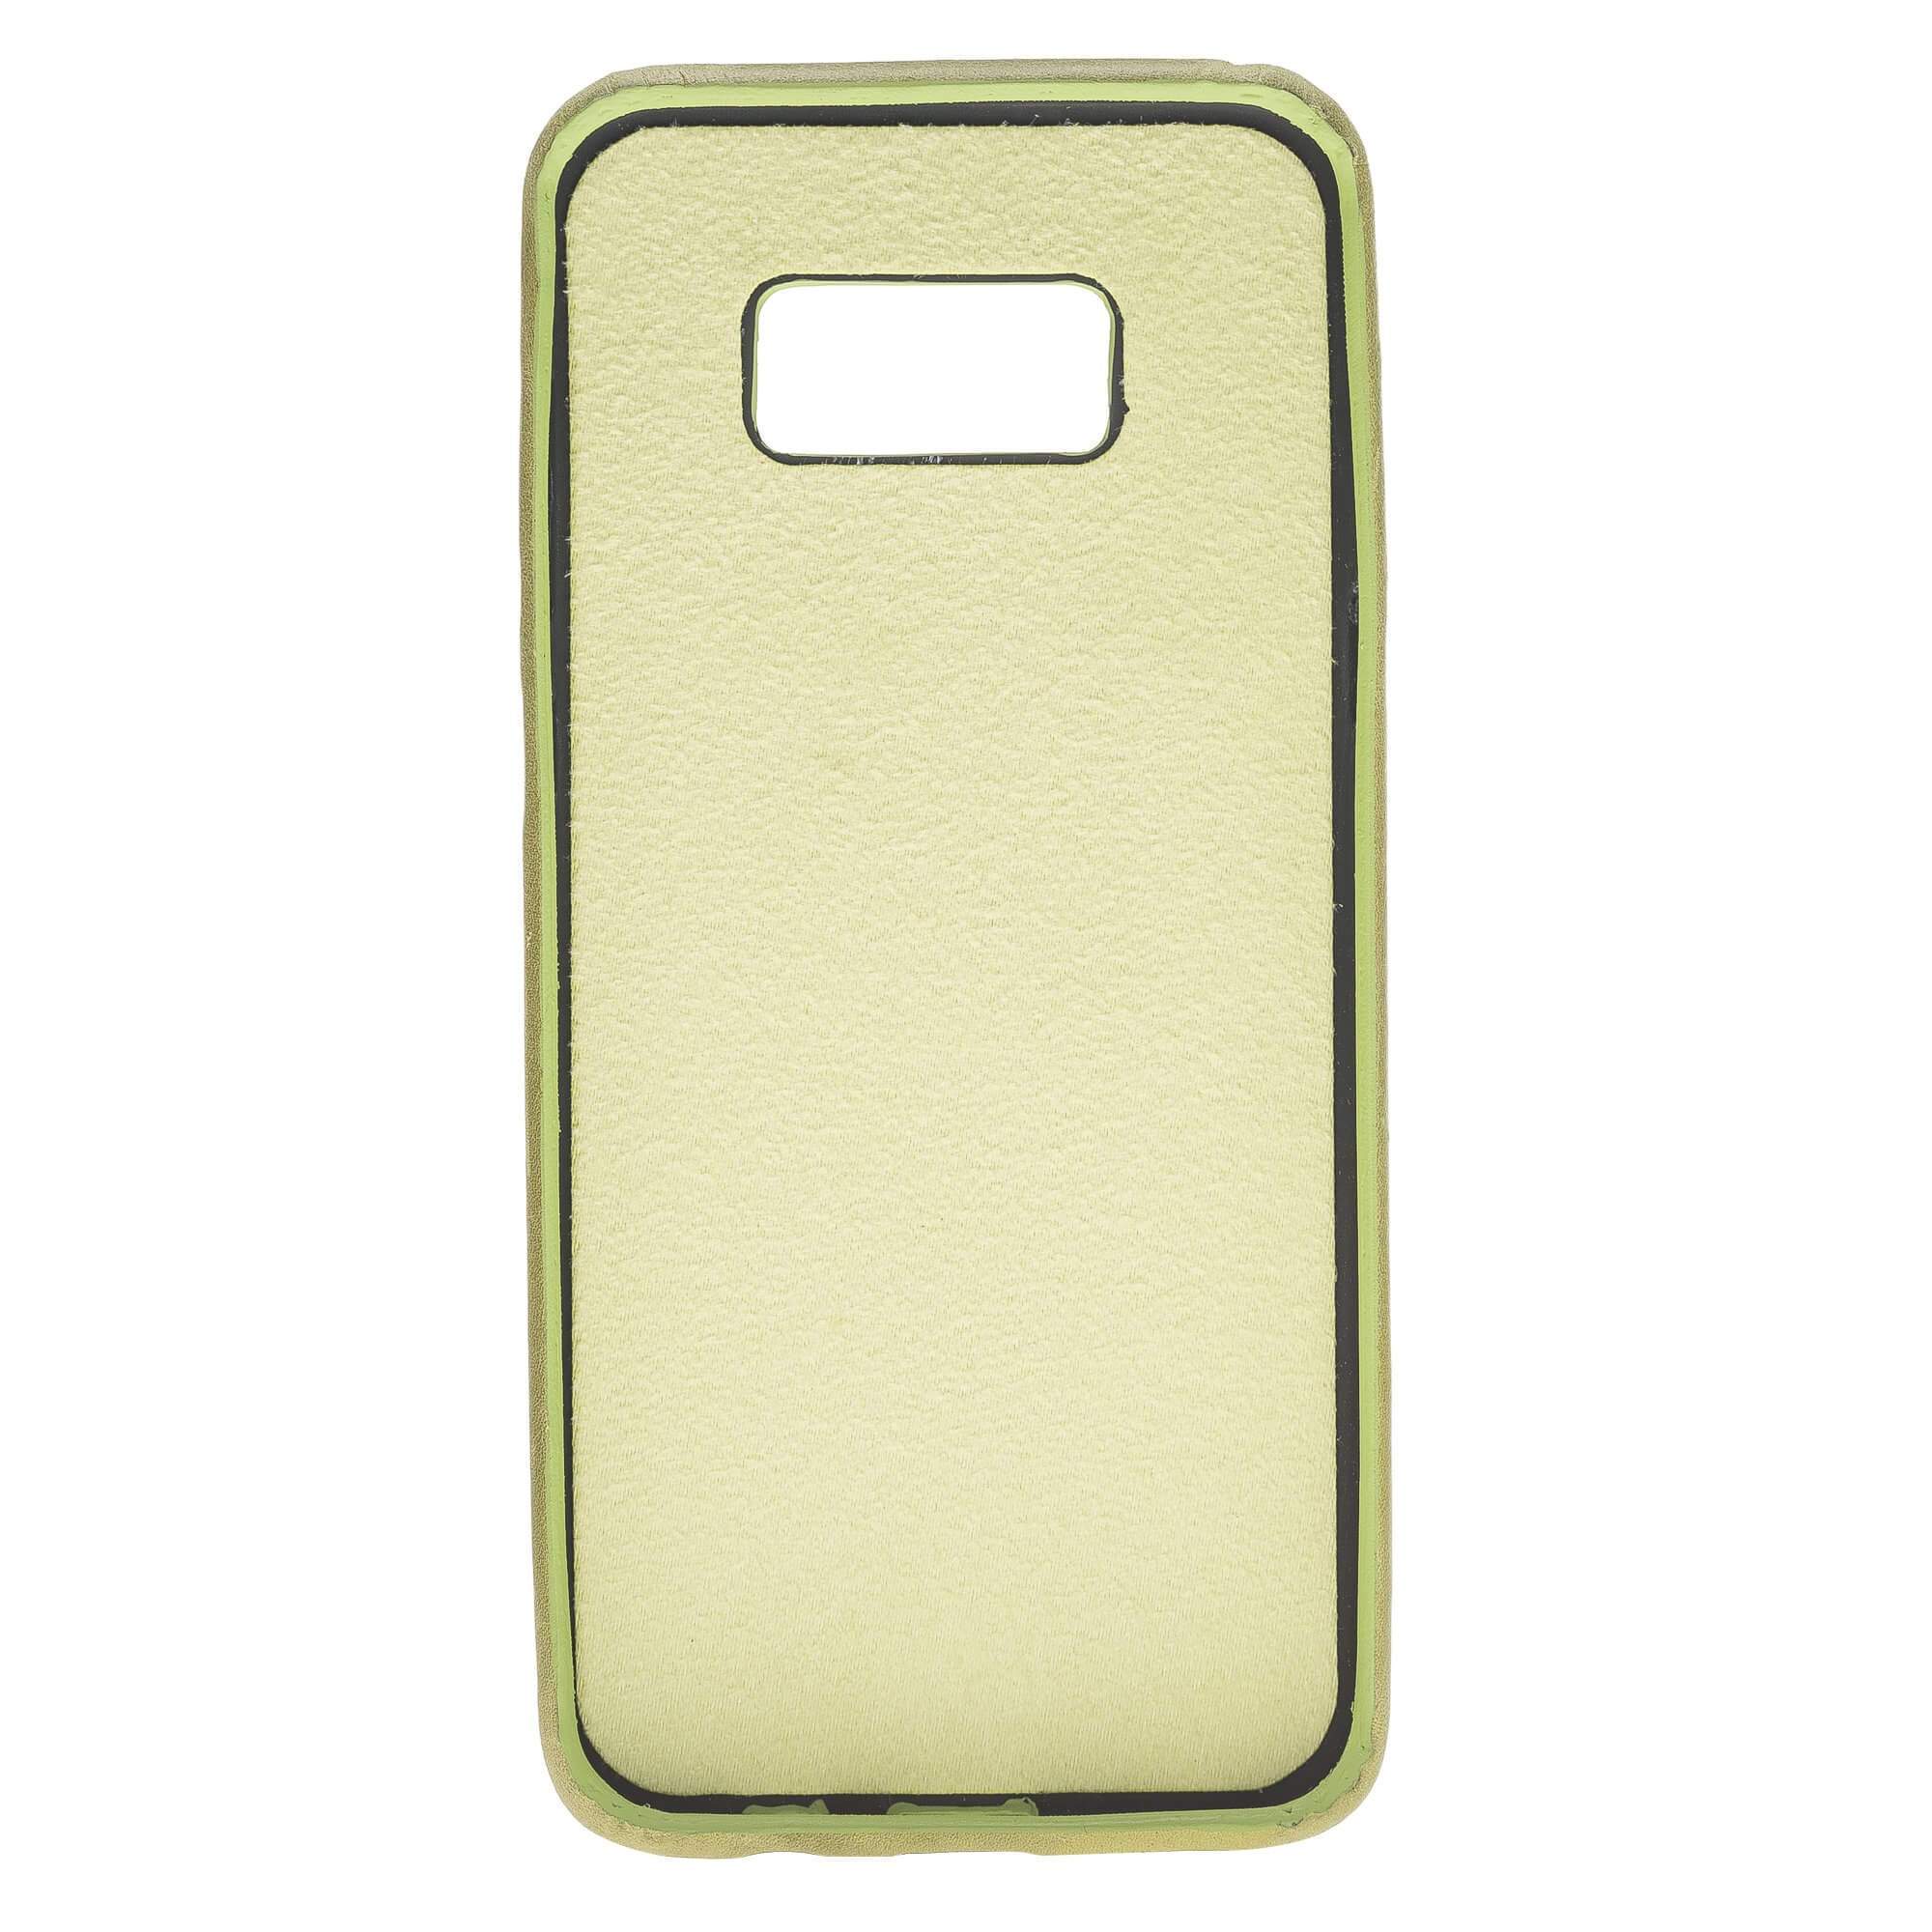 Phone Case Leather Ultra Cover with Credit Card Slots for Samsung S8 Plus - Crazy Green Bouletta Shop